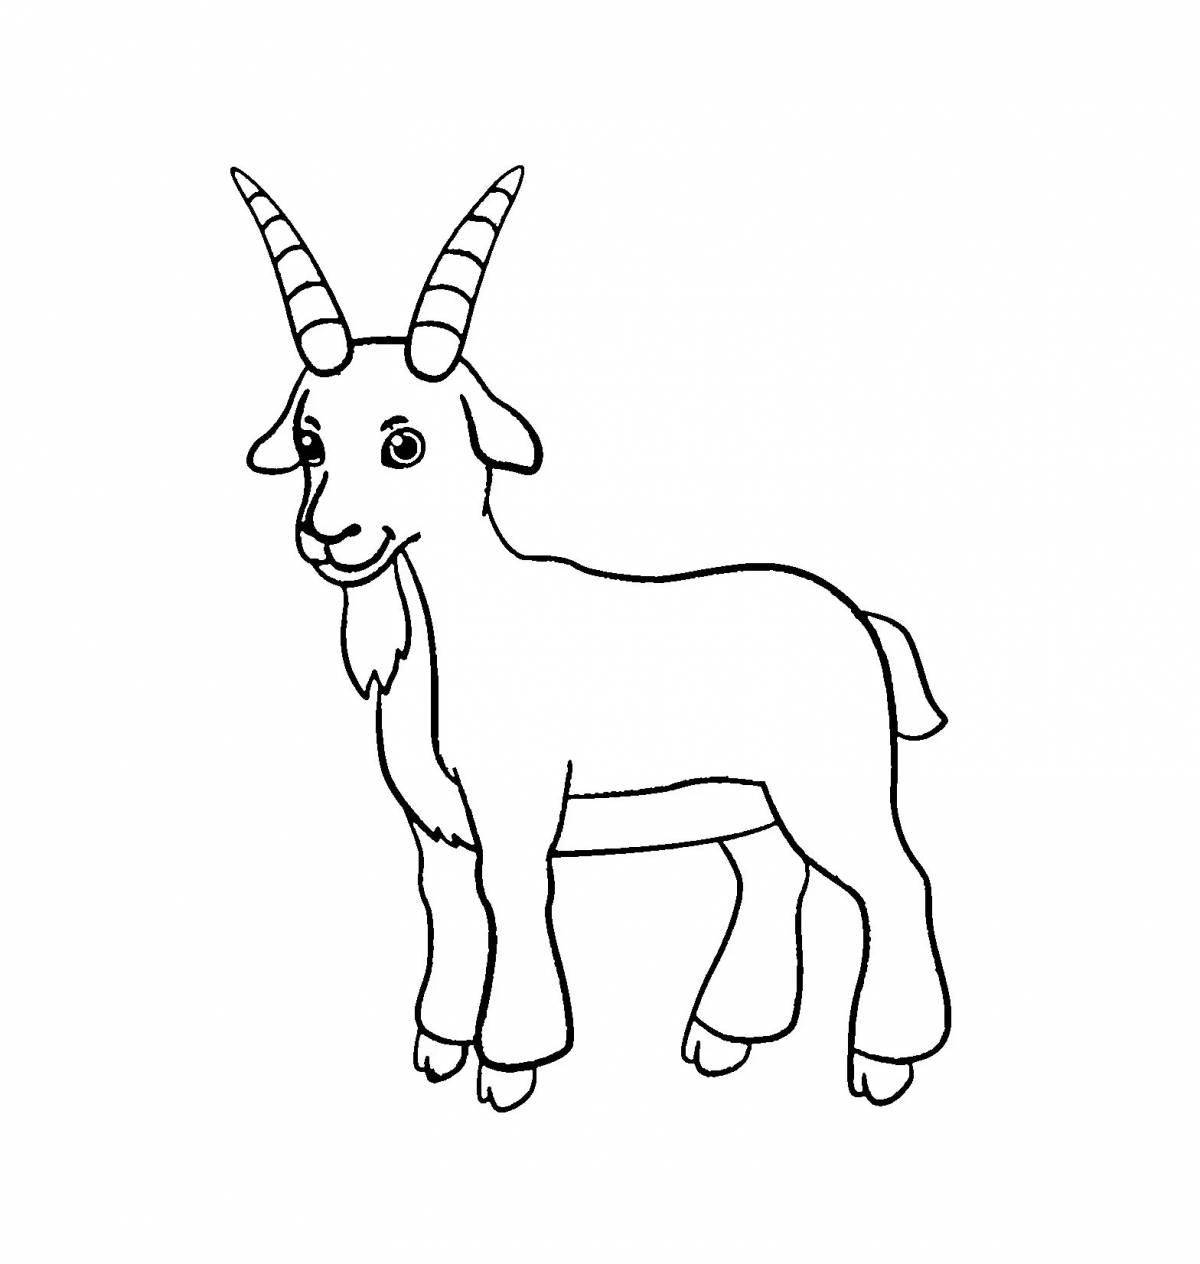 Colorful goat coloring page for kids